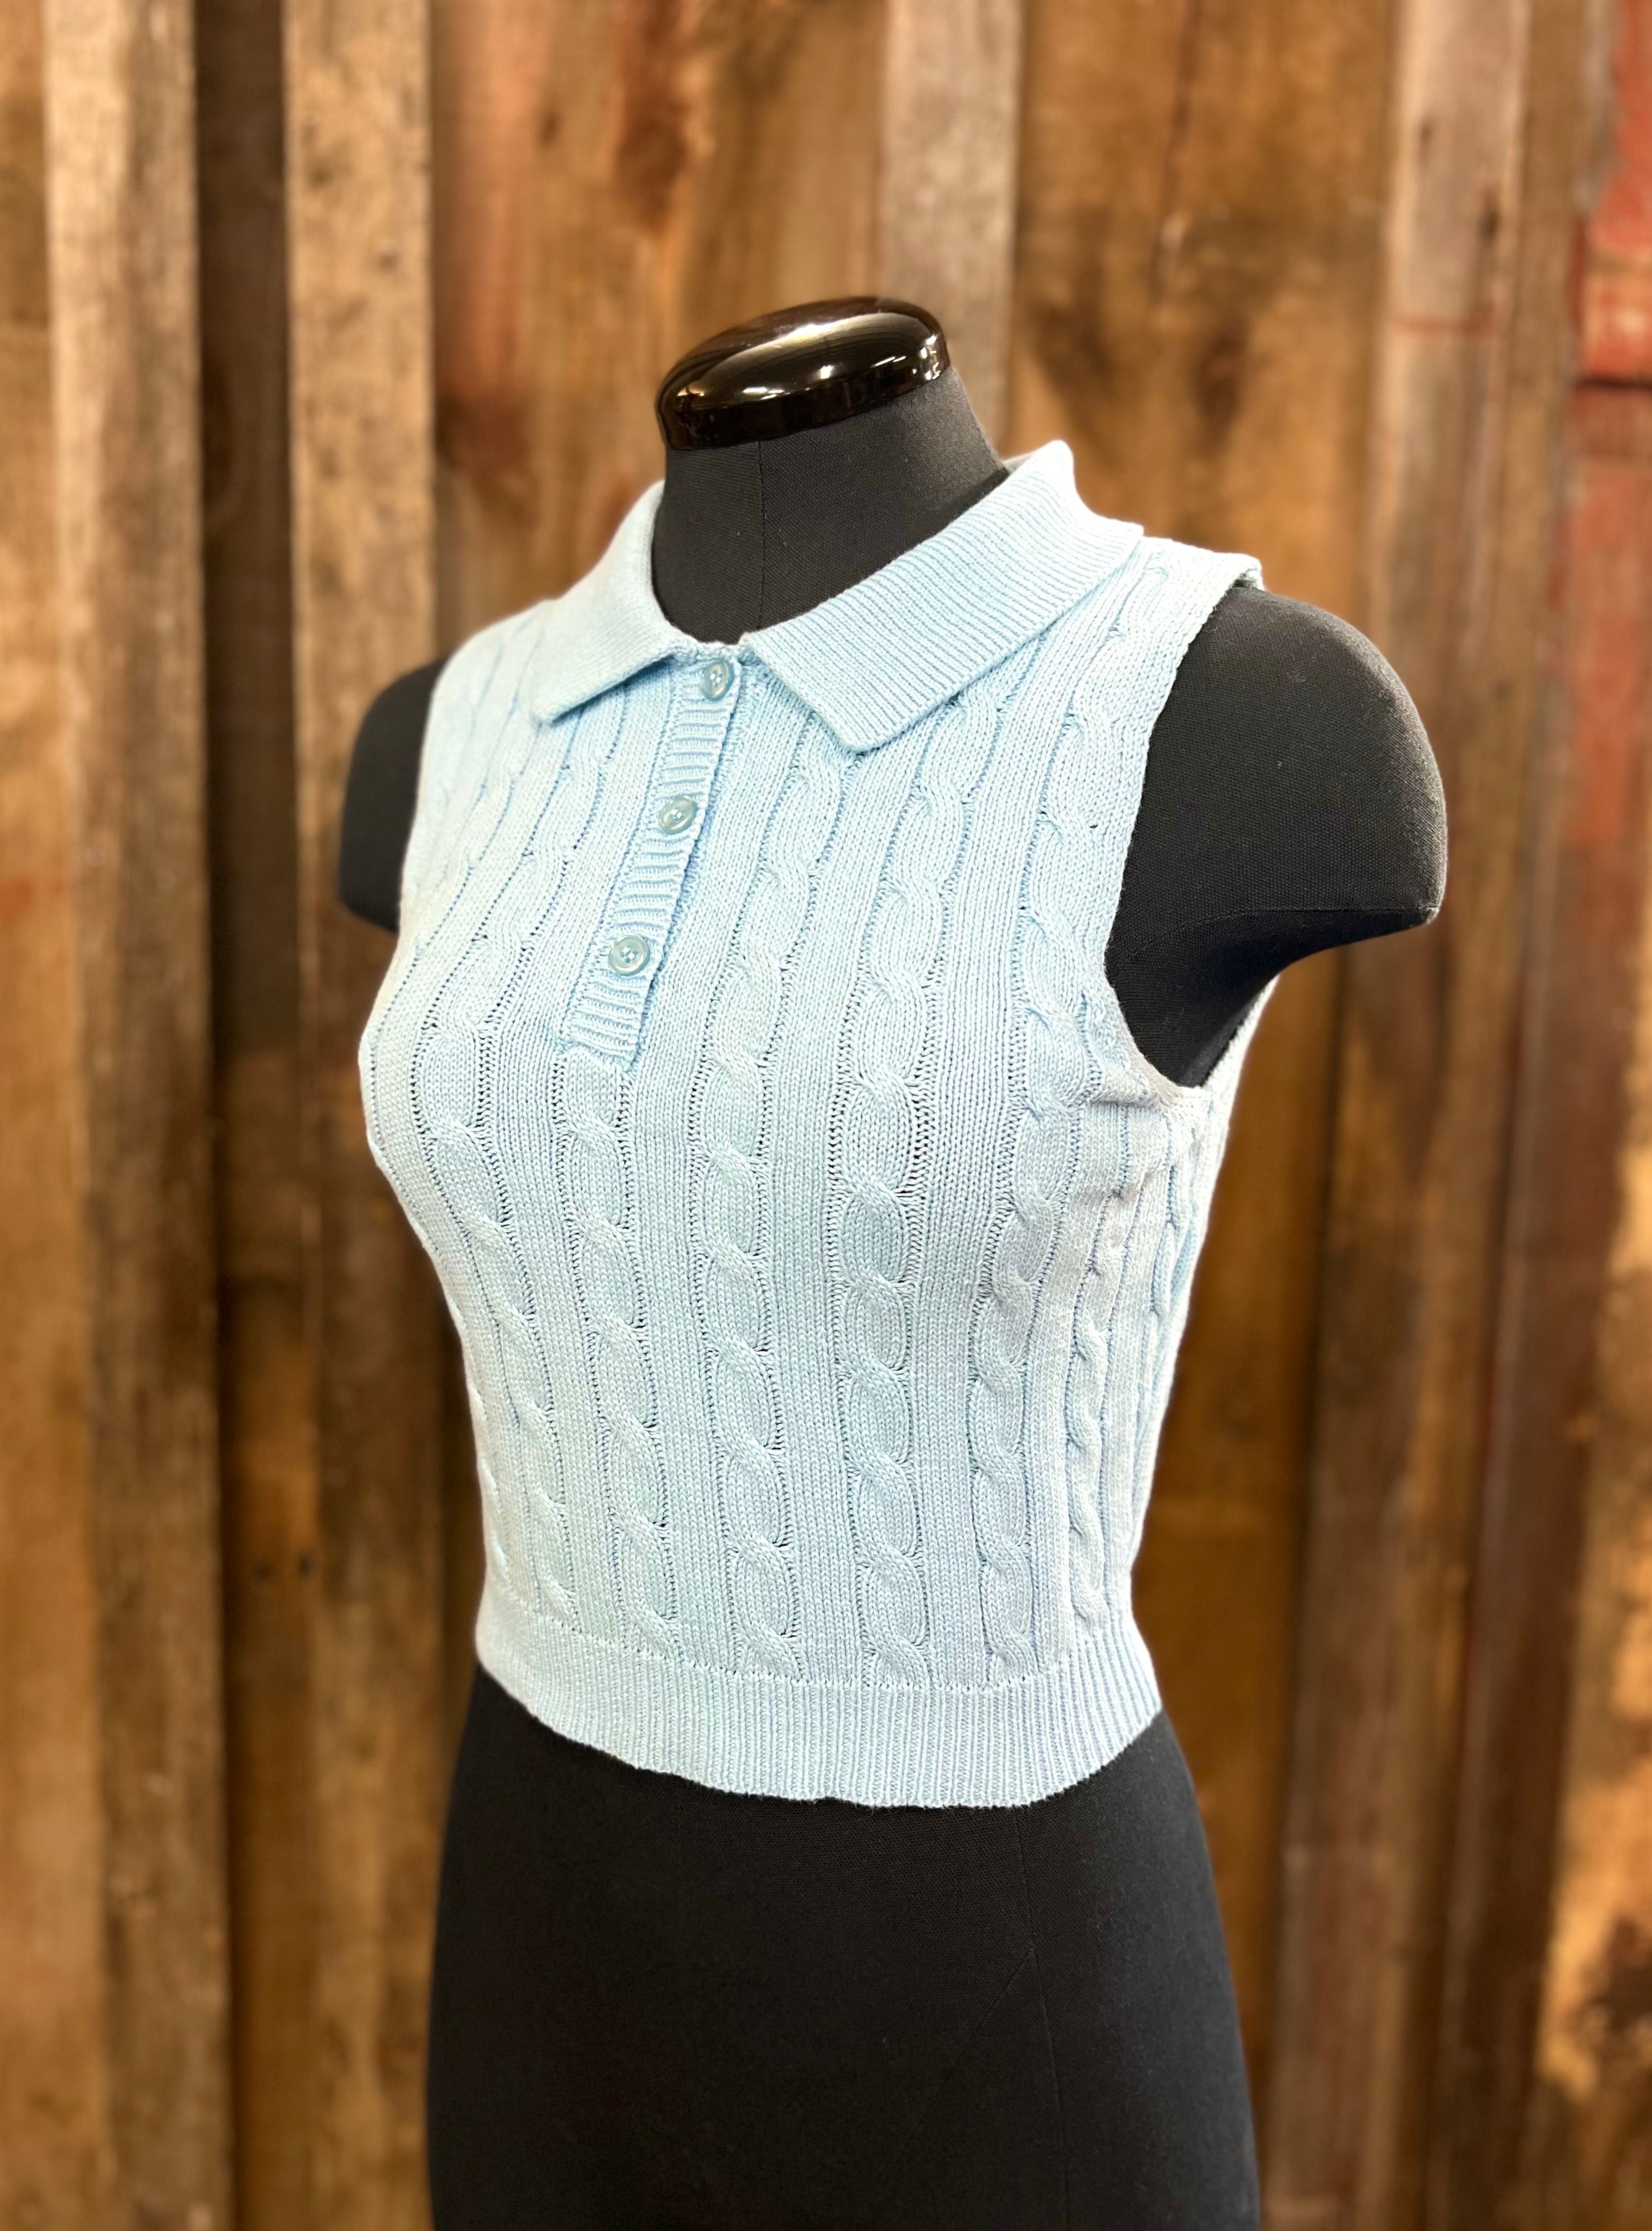 Blue Cable Knit Tank Top